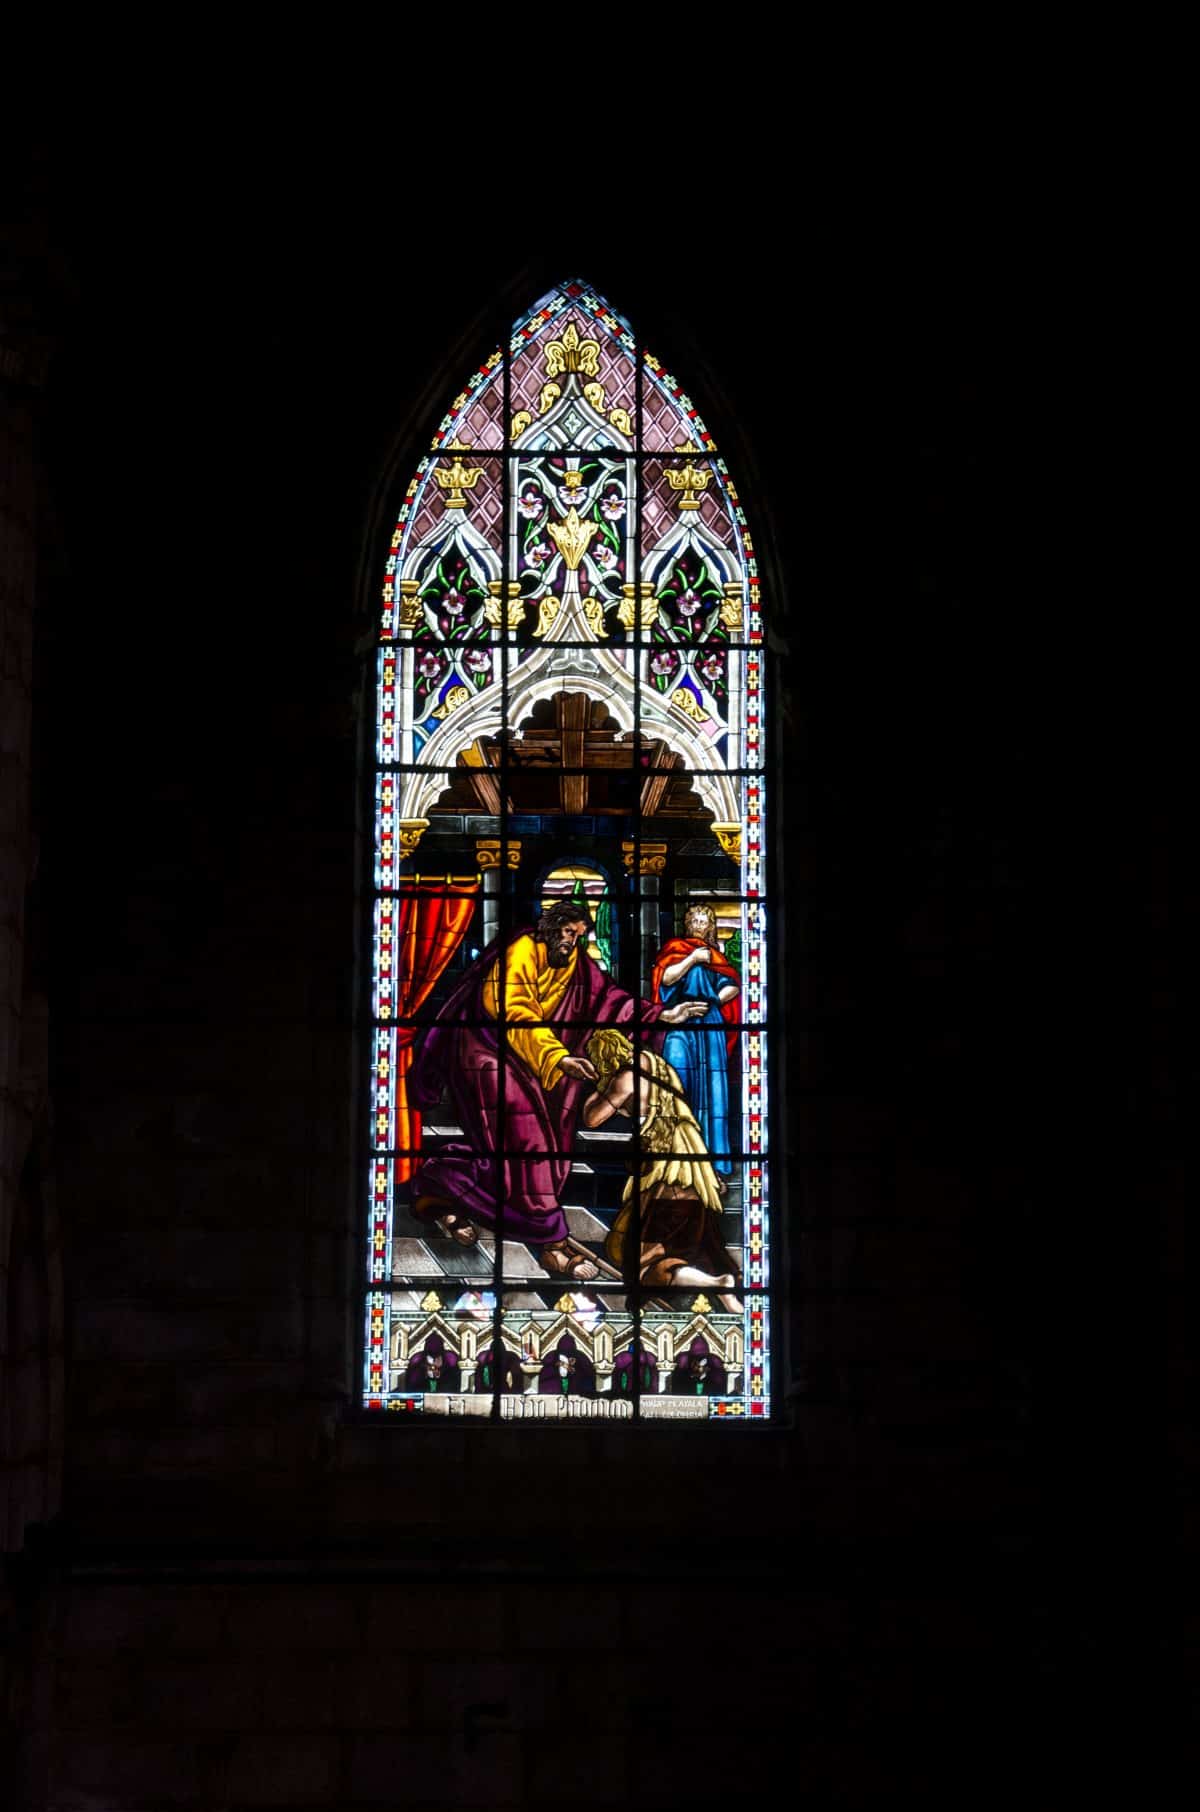 The stained glass windows are all very ornate | ©Angela Drake